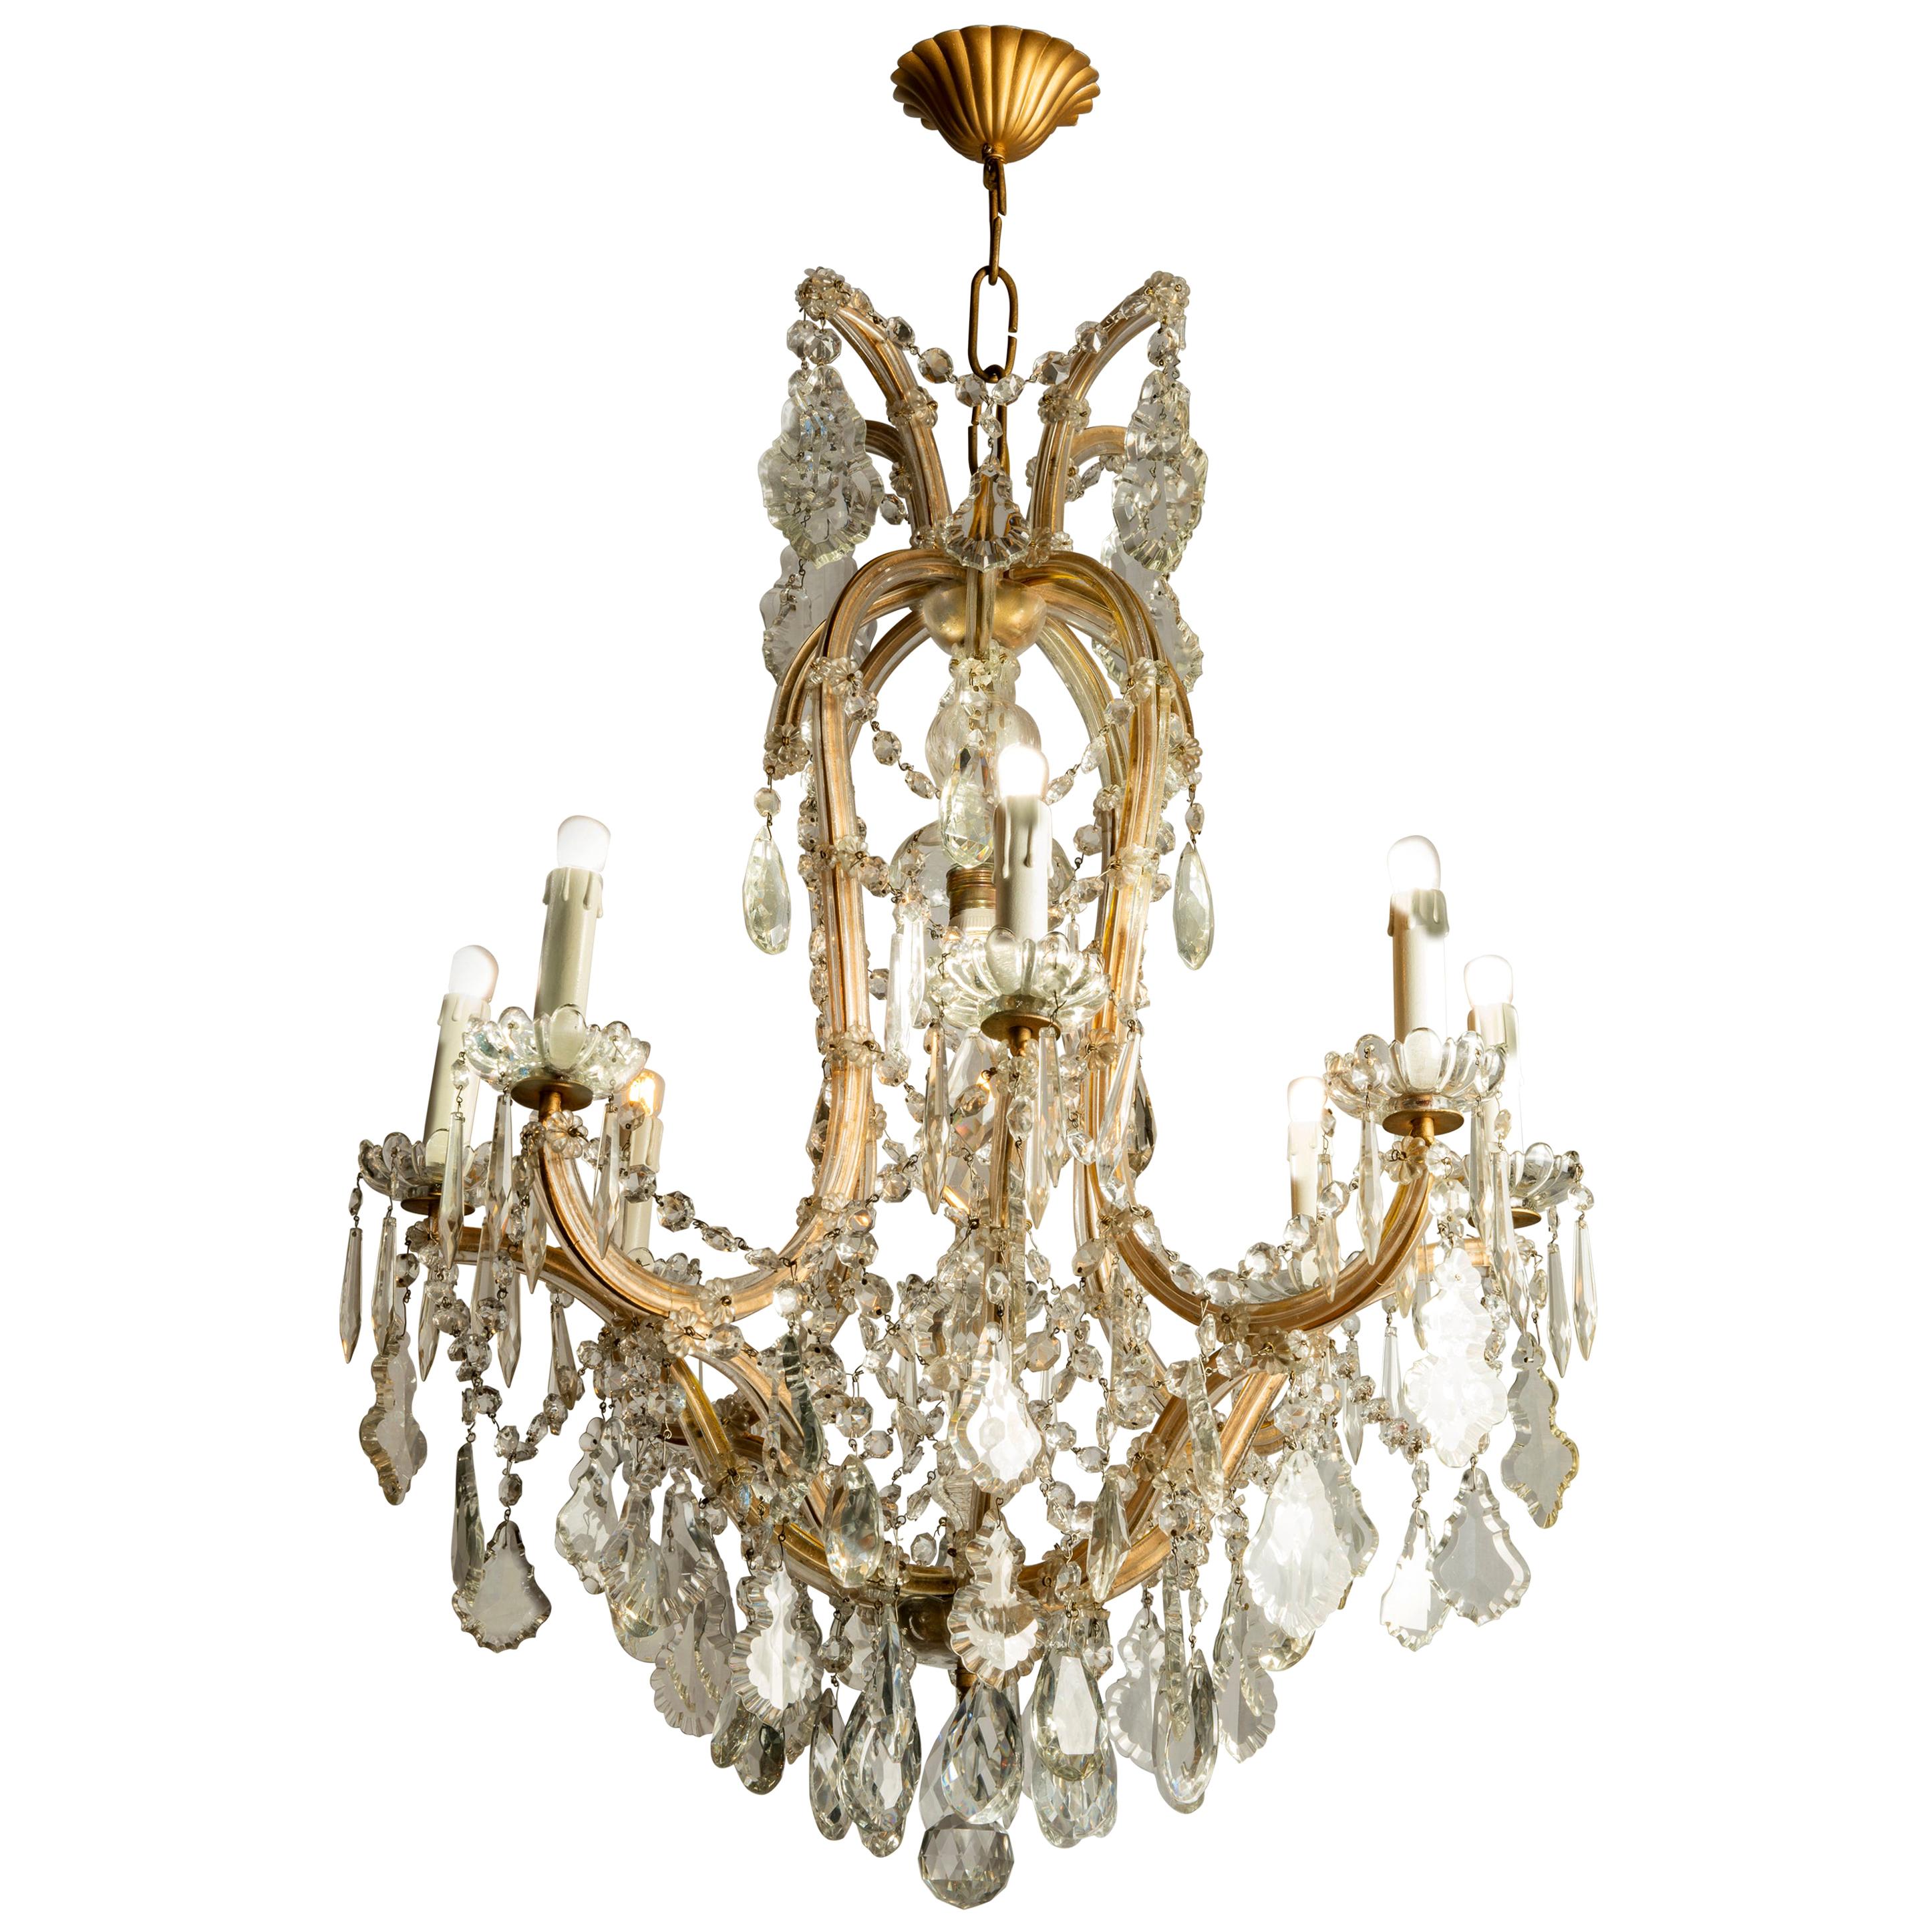 Marie Therese Crystal Chandelier Mid-20th Century Nine-Light Pendant from Italy